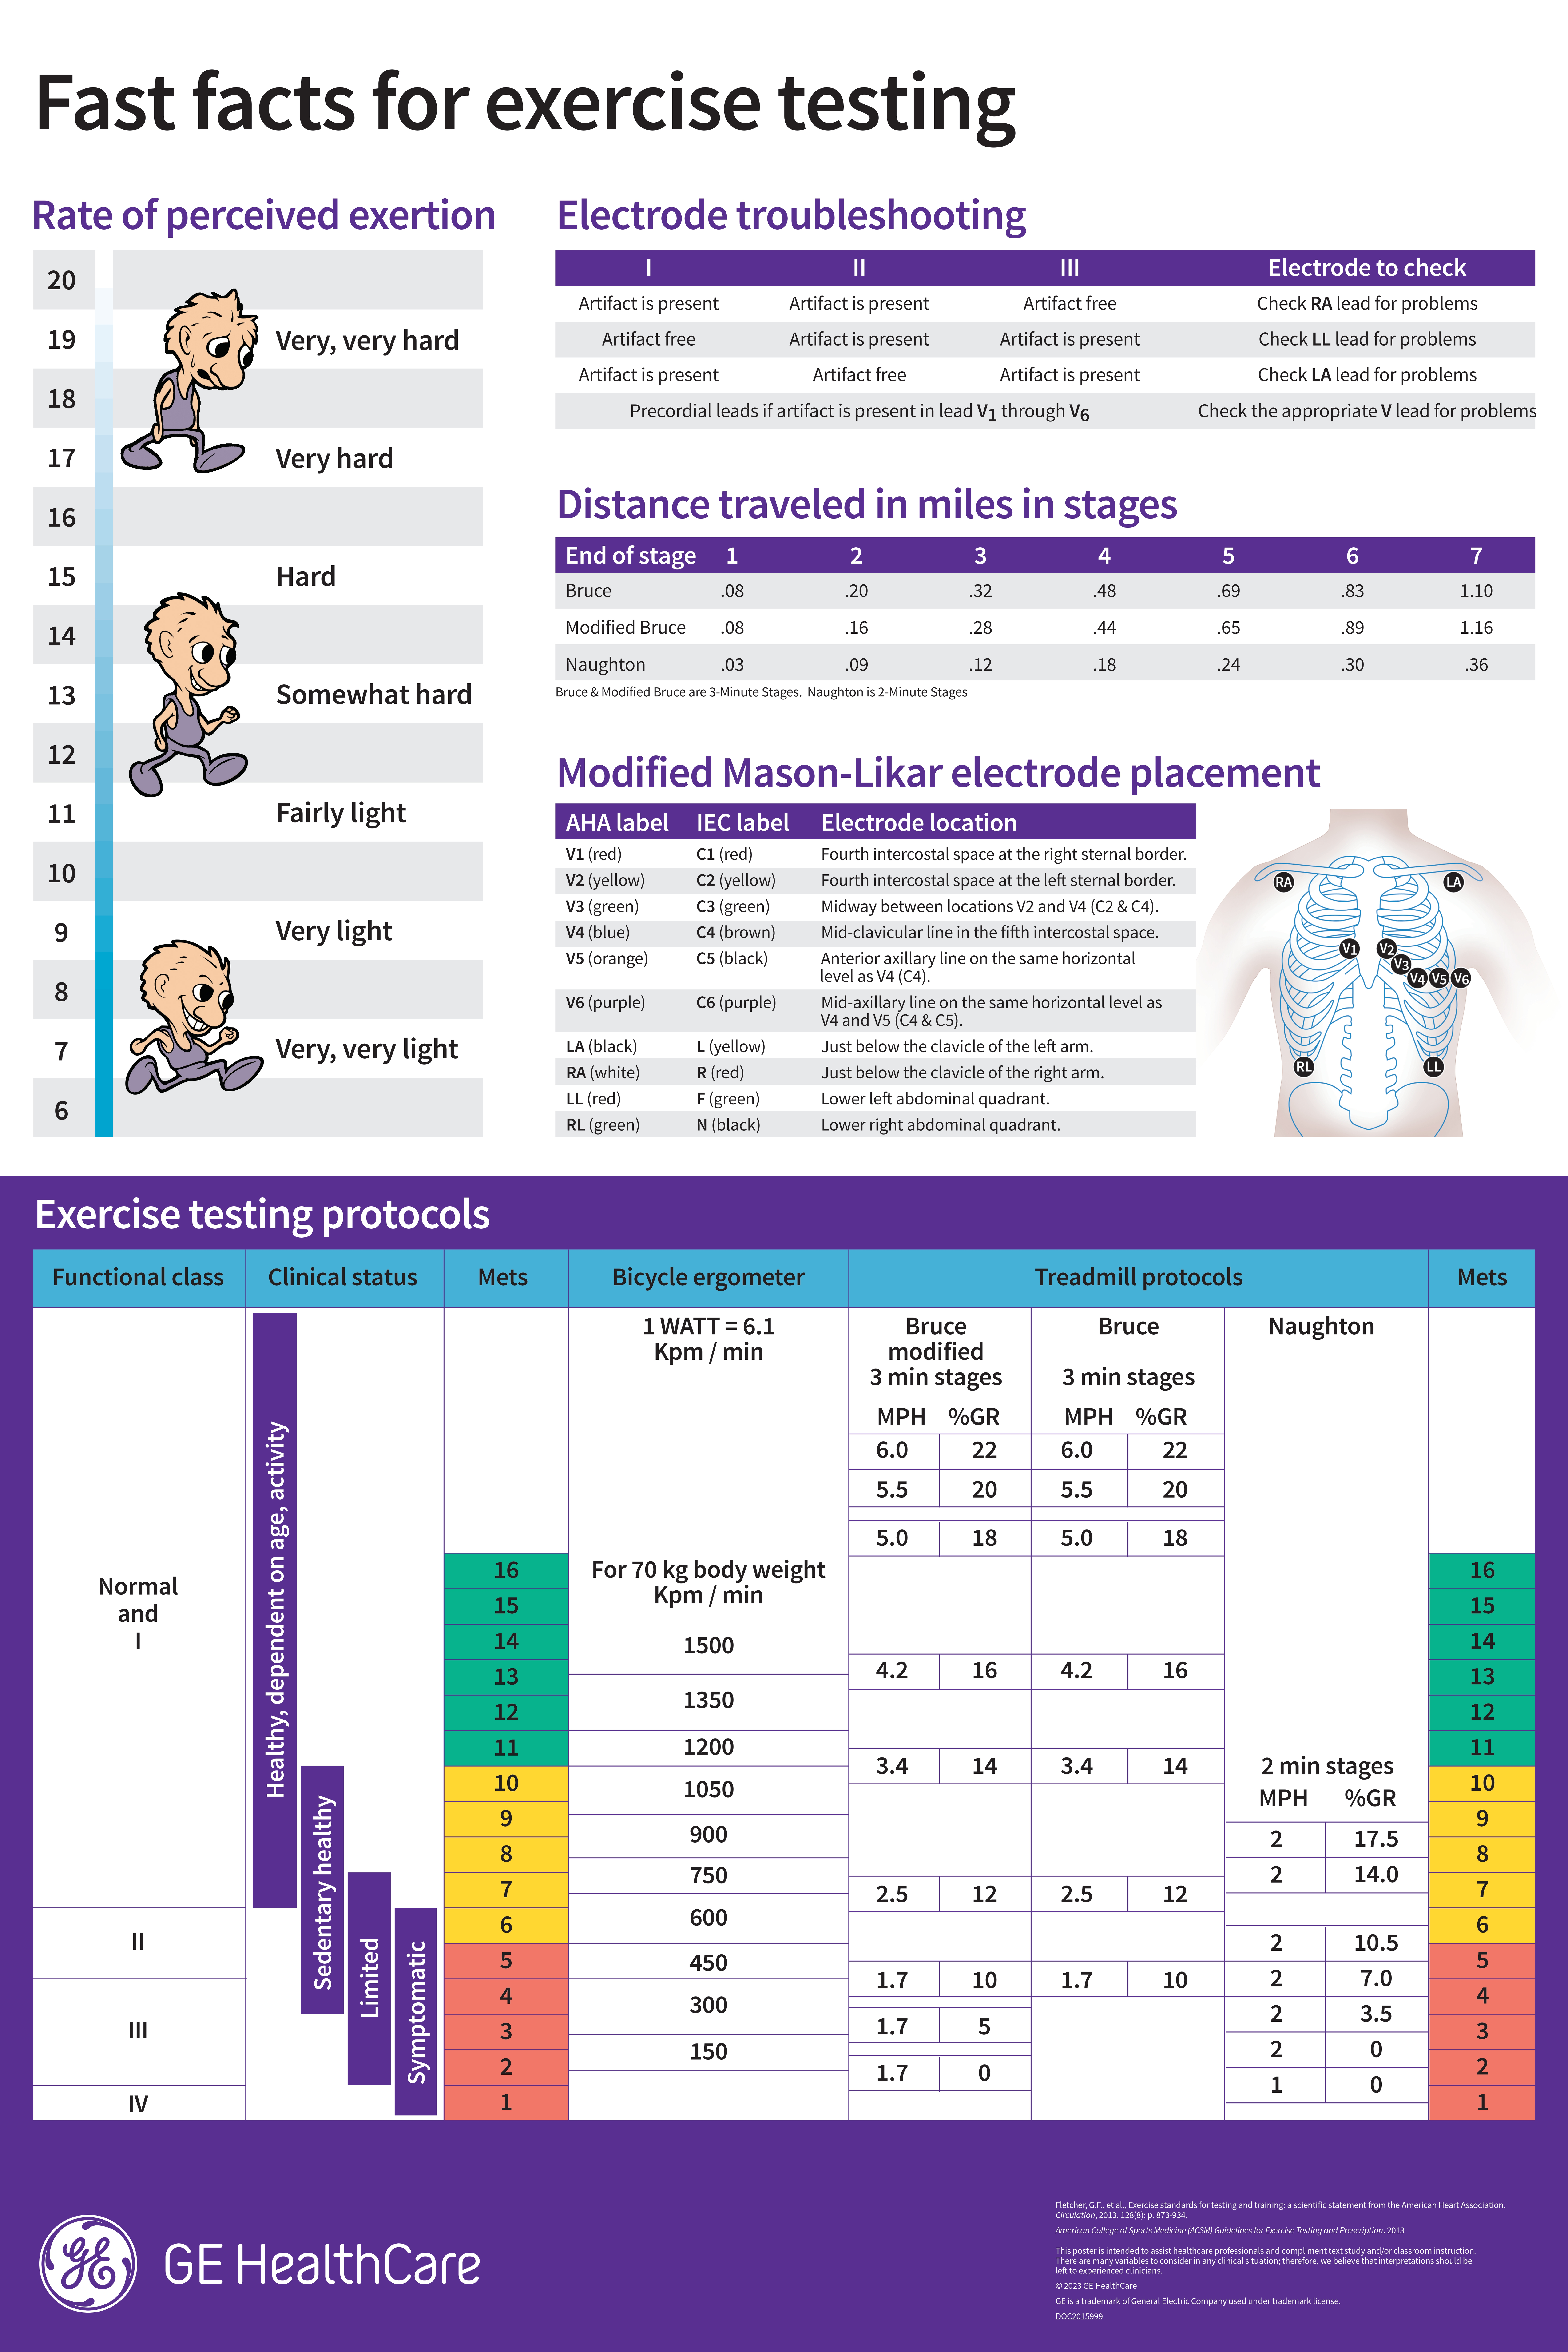 Fast facts for exercise testing poster